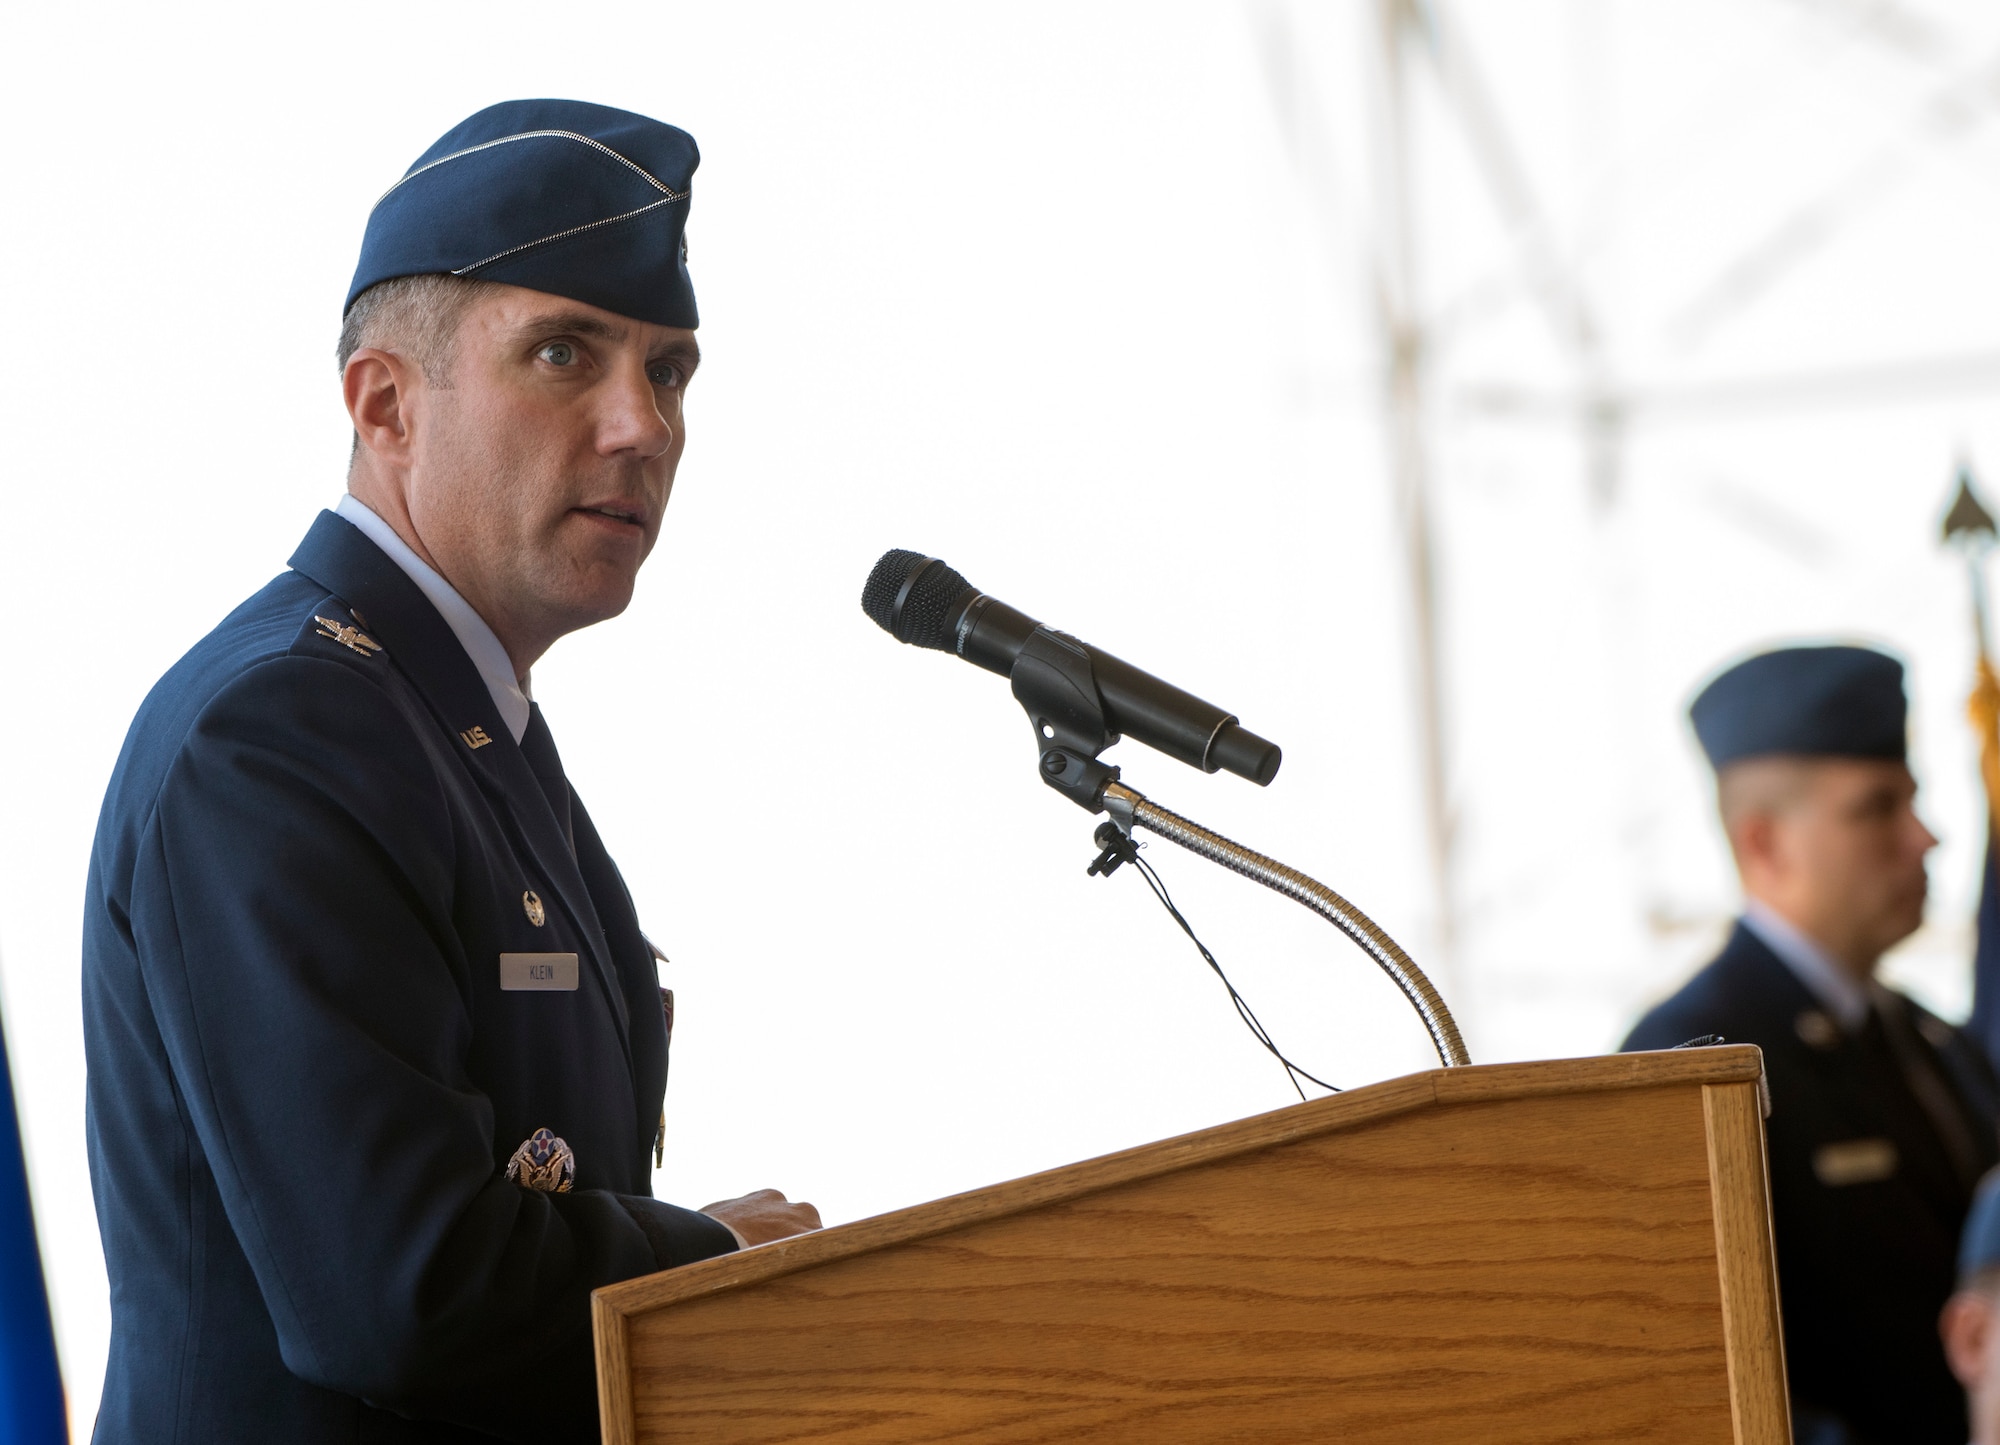 U.S. Air Force Col. John Klein delivers his final speech as commander, 60th Air Mobility Wing, during a change of command ceremony, July 10, 2018, Travis Air Force Base, Calif. Klein relinquished command of Air Mobility Command's largest wing to Col. Ethan Griffin. (U.S. Air Force Photo by Heide Couch)